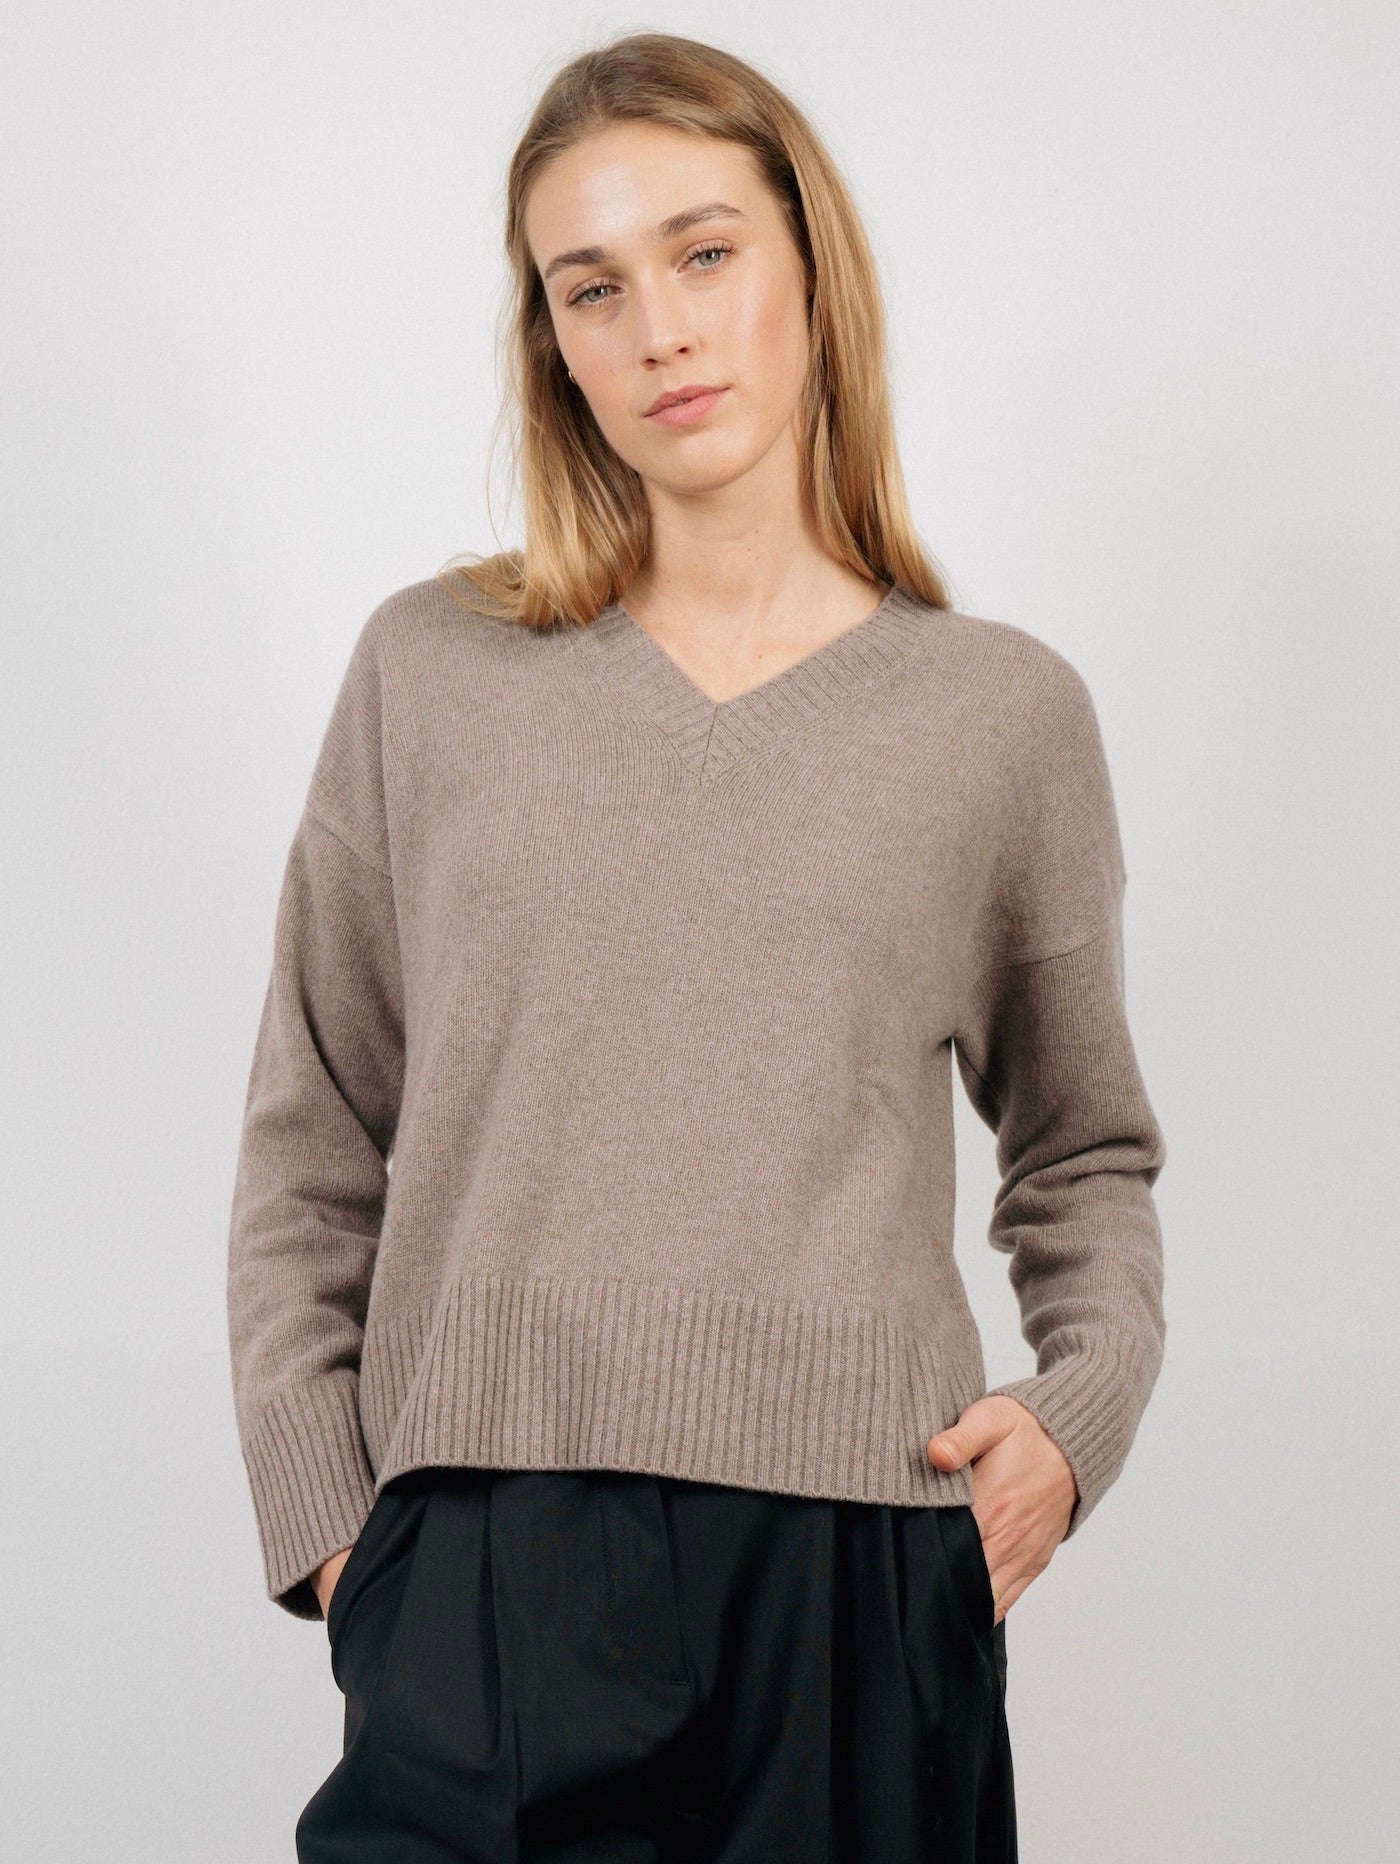 VALERIE SWEATER IN TIMELESS TAUPE